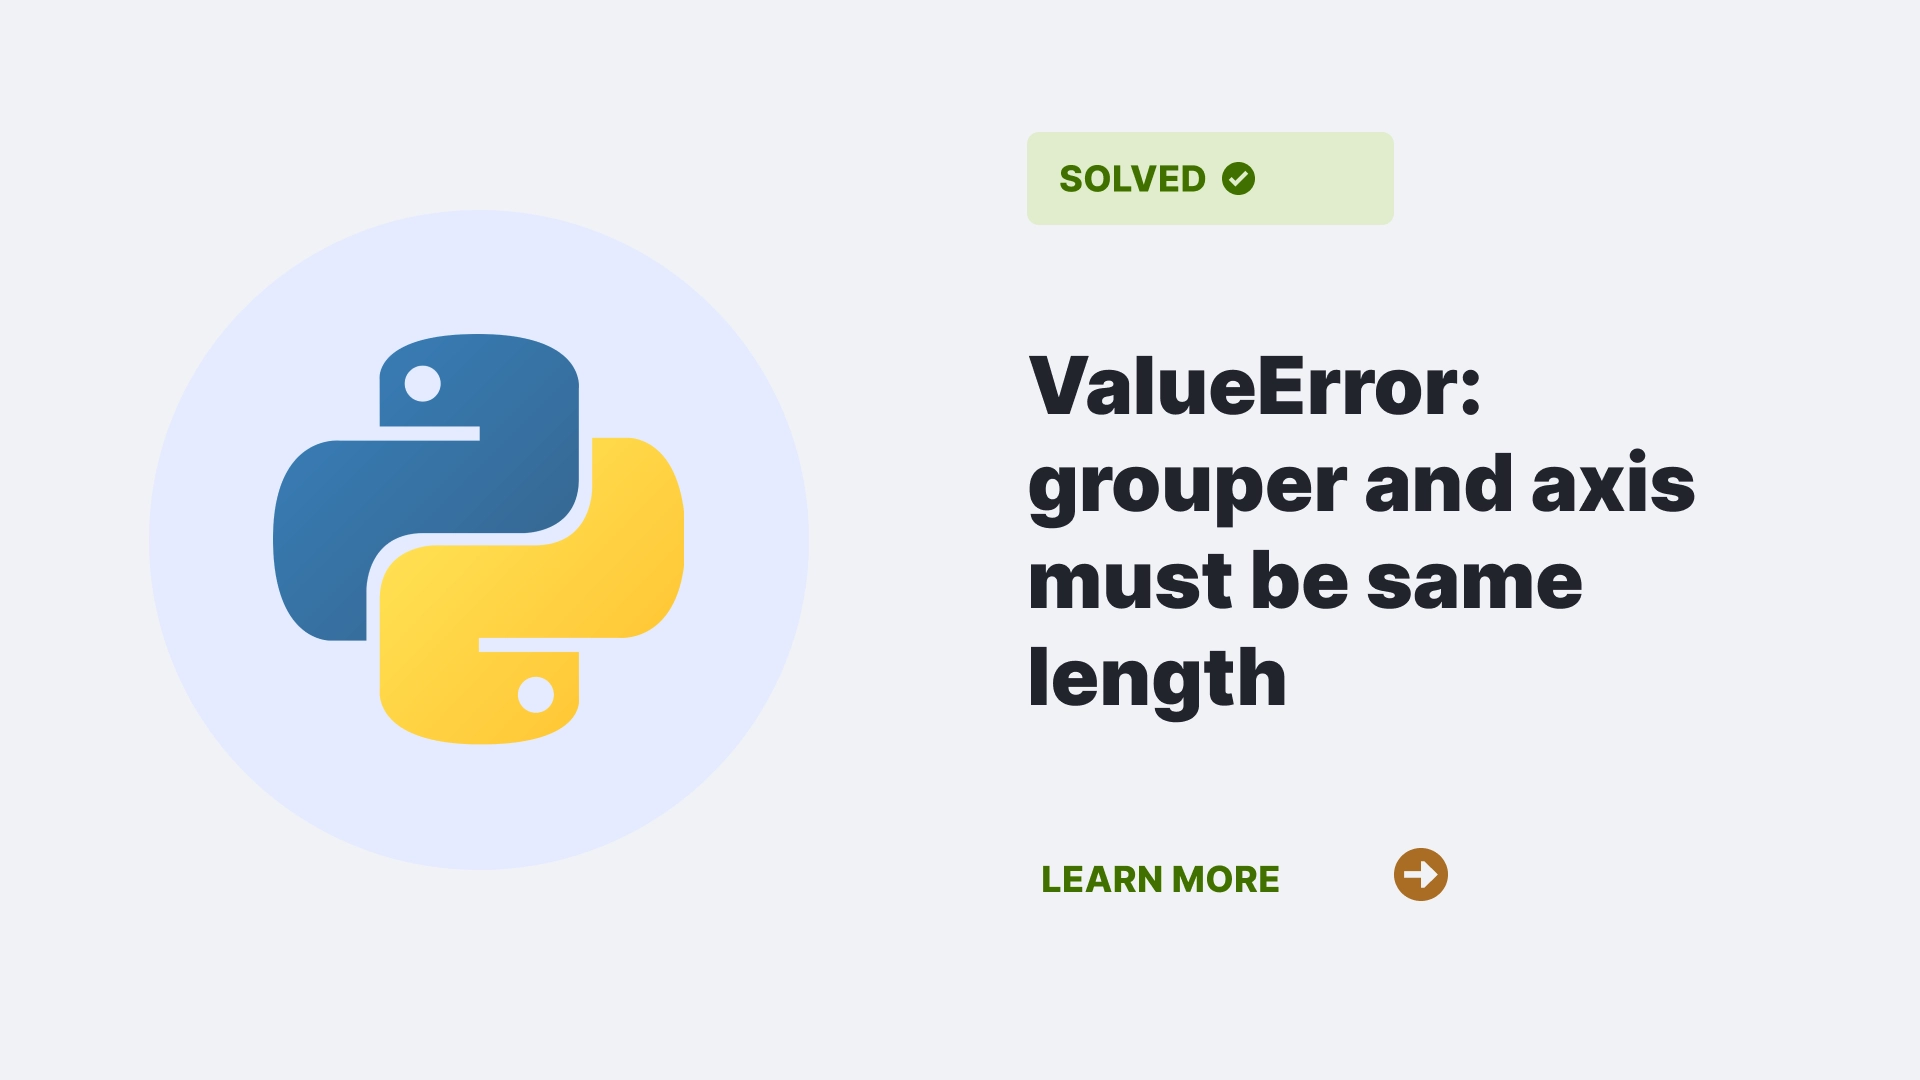 ValueError: grouper and axis must be same length